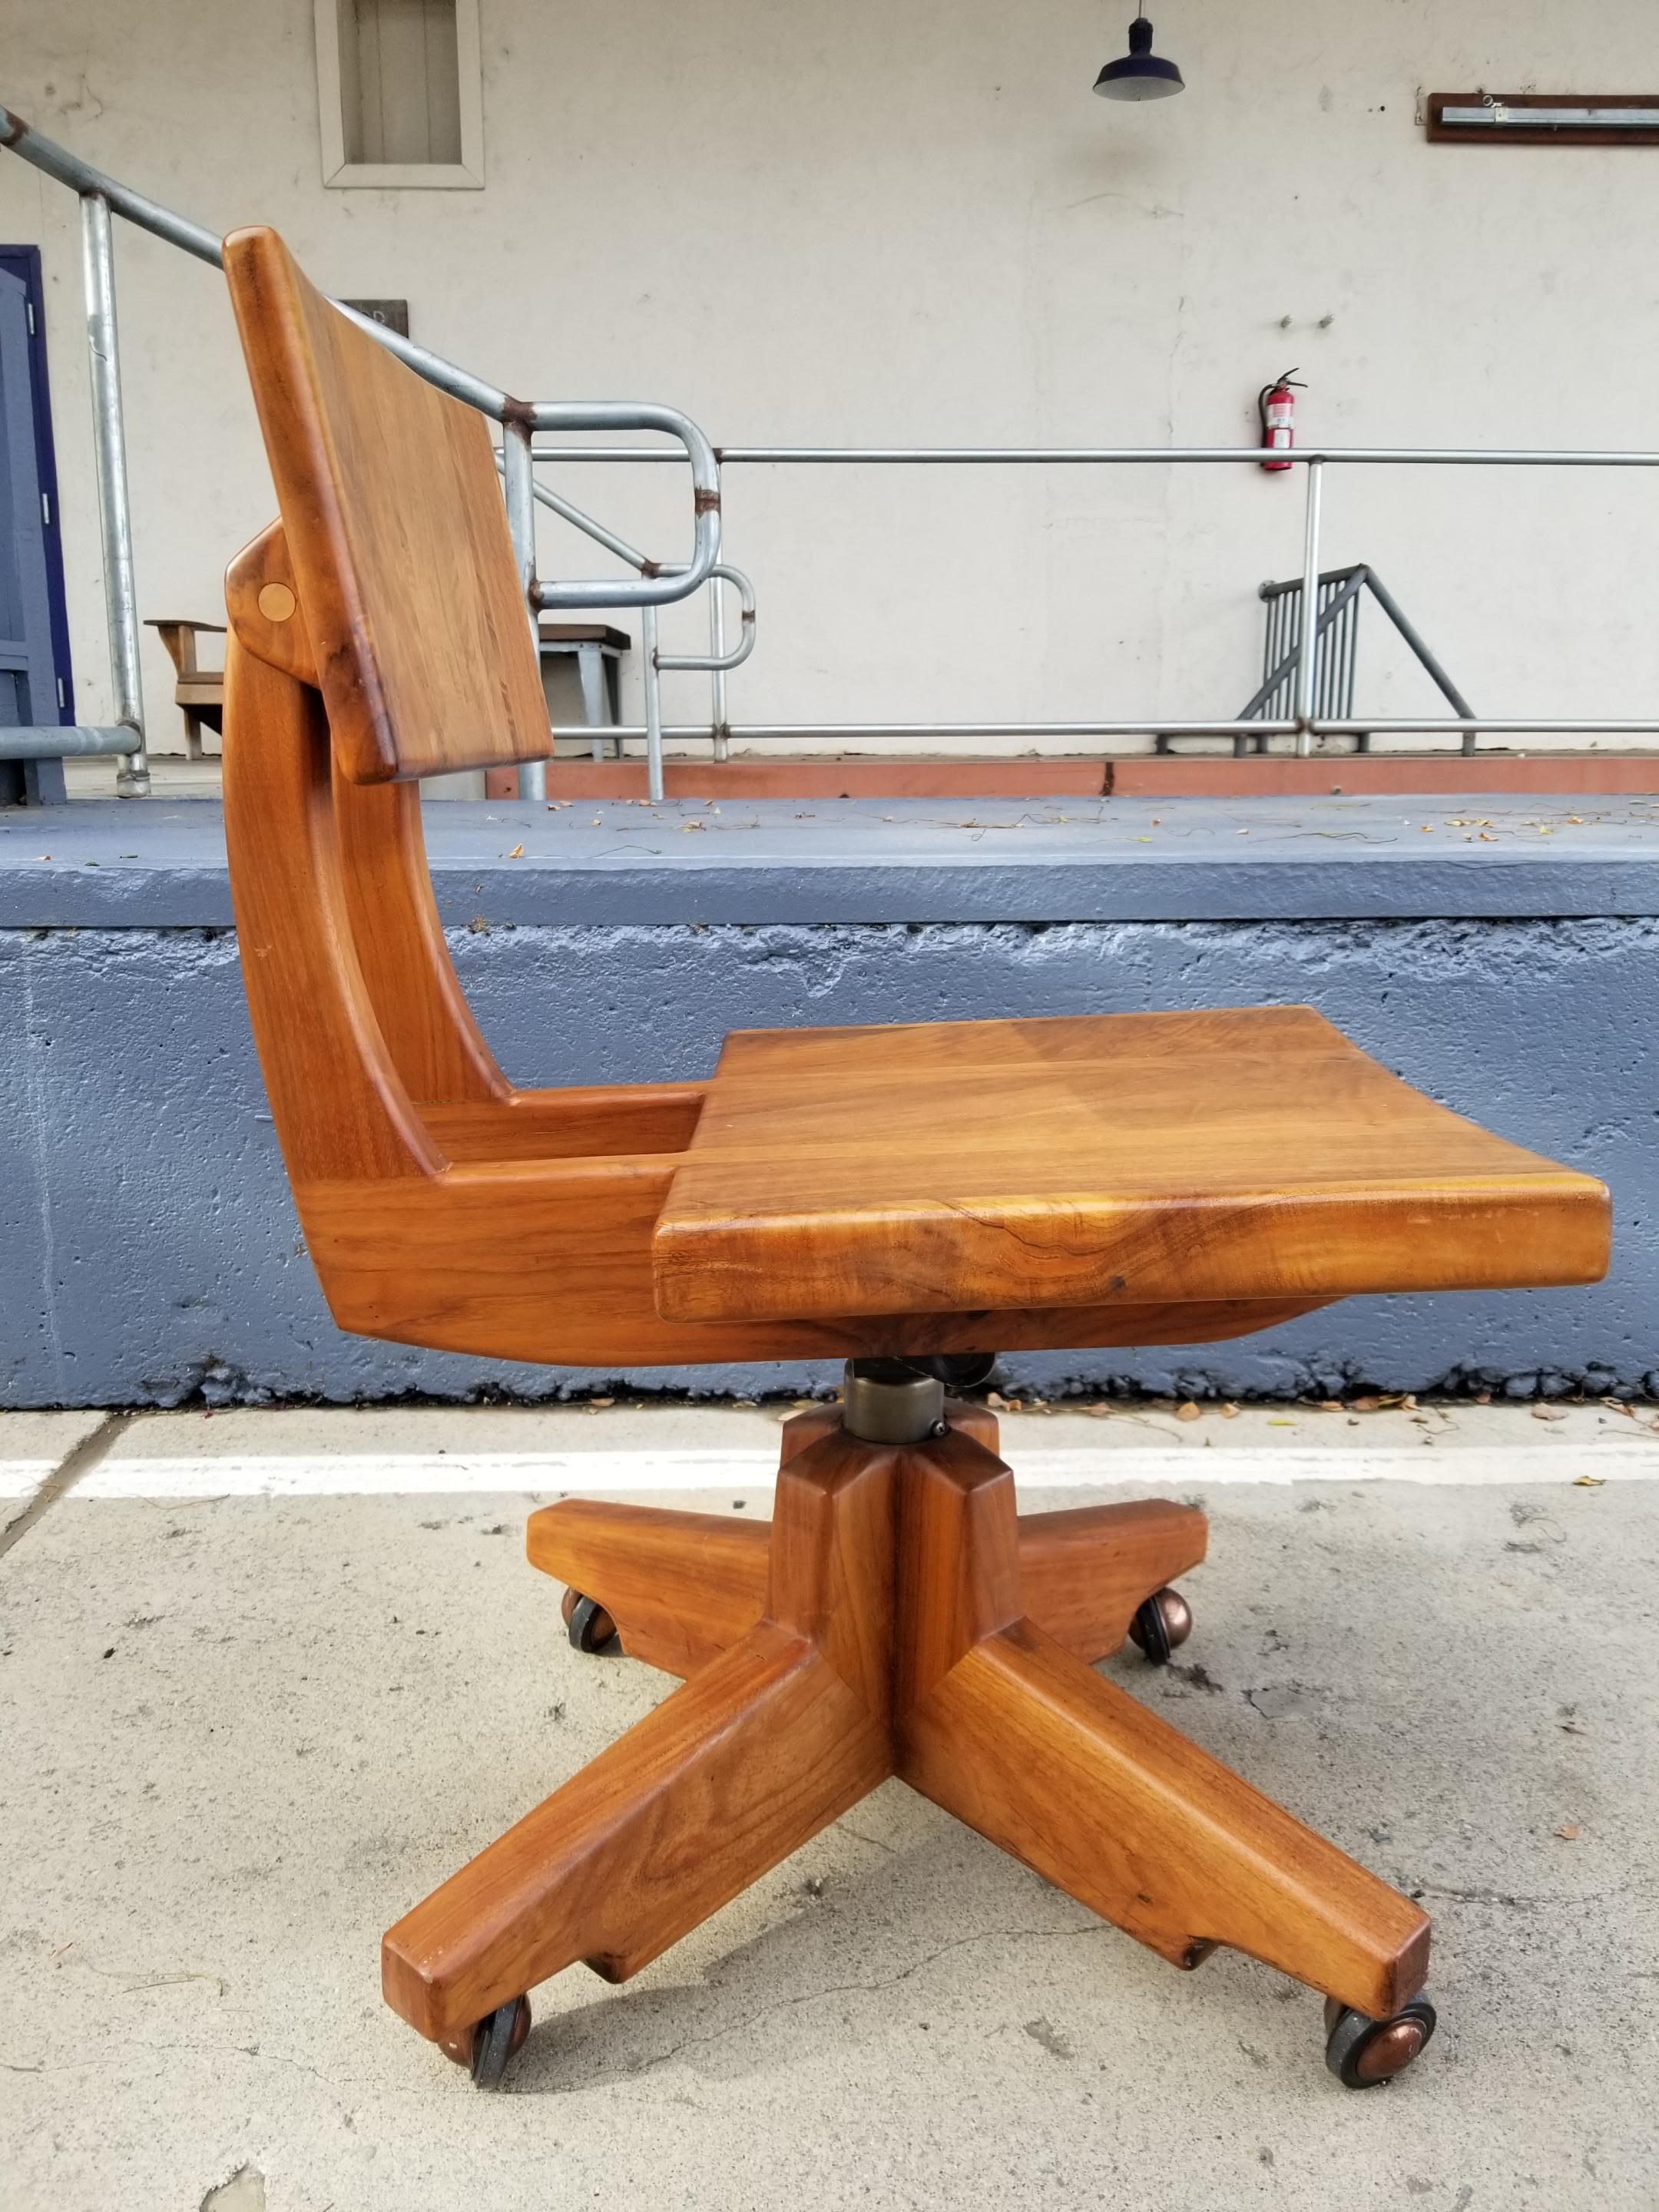 A Mid-Century Modern swivel, work or desk chair handcrafted by Robert & Joanne Herzog. Exceptional craftsmanship with all peg and mortise construction. Made of a solid, figured hardwood. Seat back rest tilts for additional comfort. Seat height is